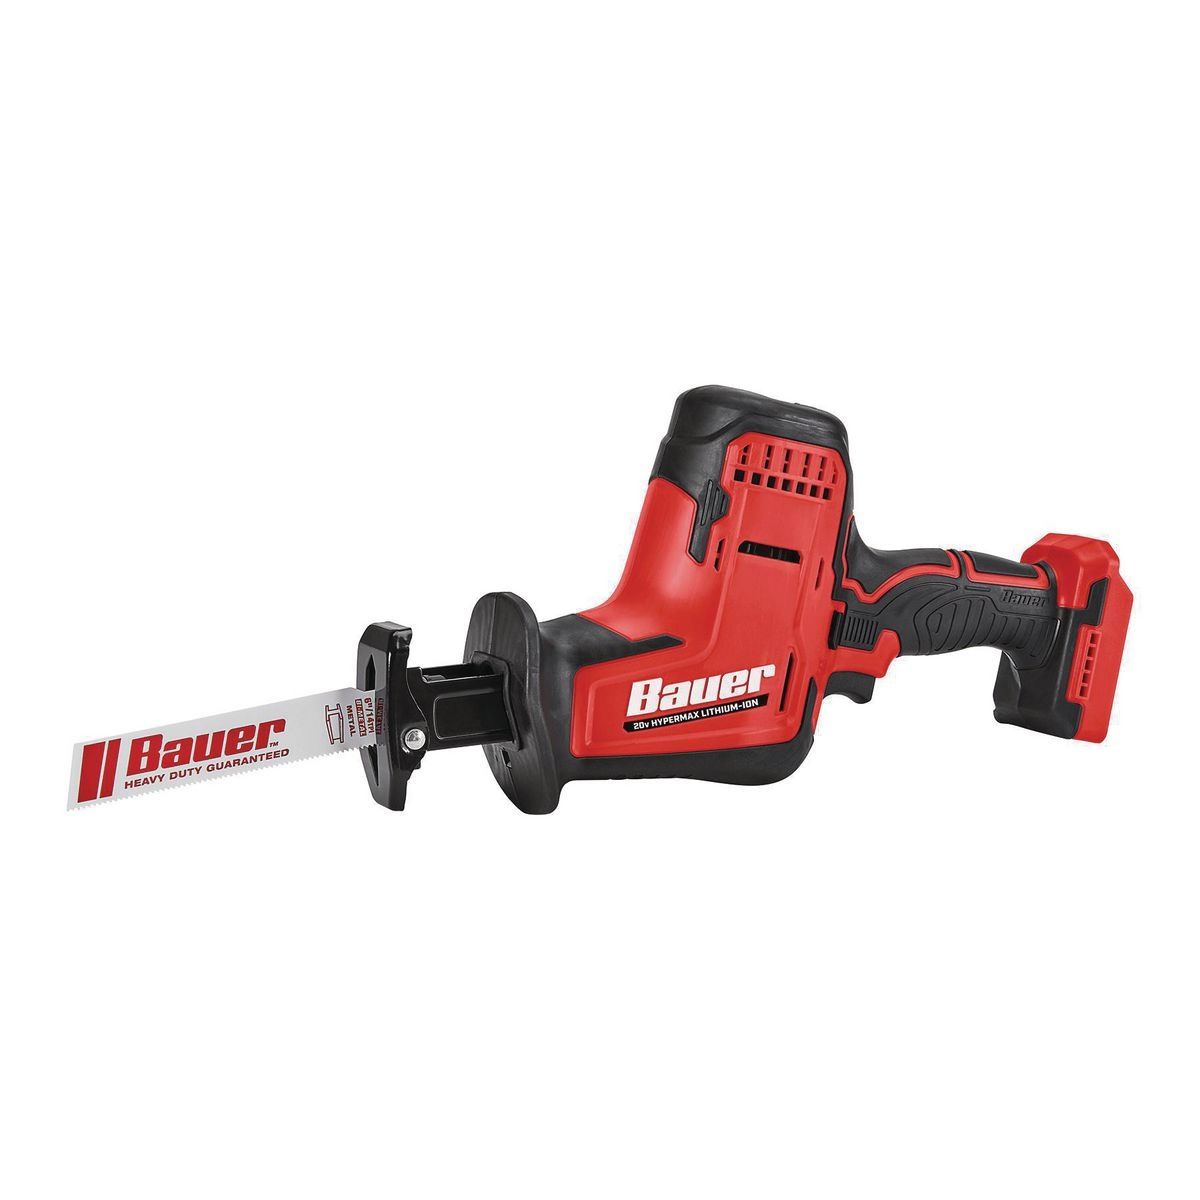 BAUER 20V Brushless Cordless Compact Reciprocating Saw - Tool Only